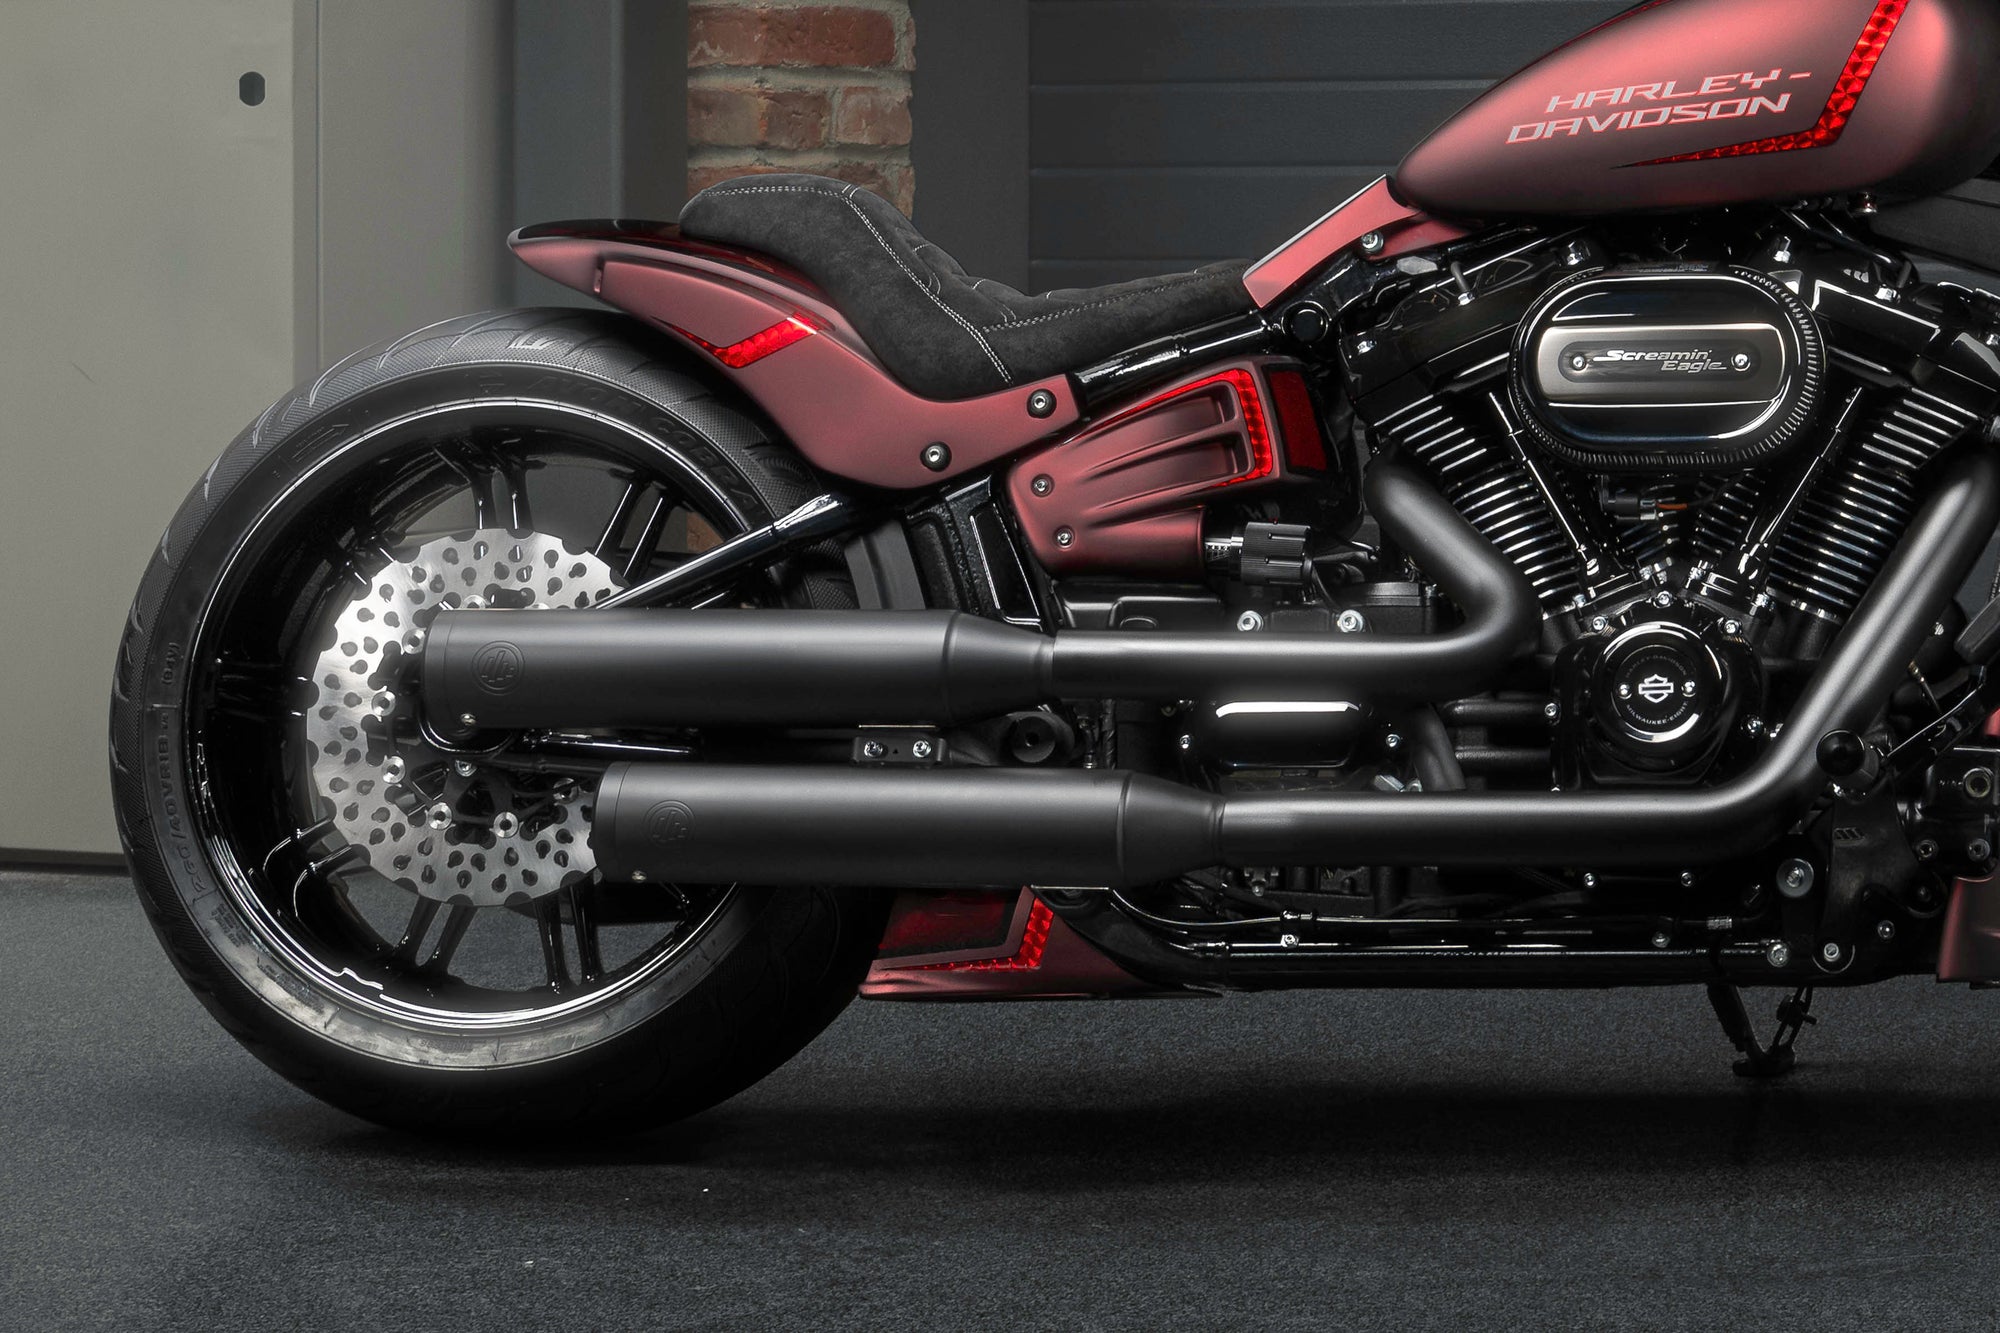 Zoomed Harley Davidson Breakout motorcycle with Killer Custom parts from the side in the garage